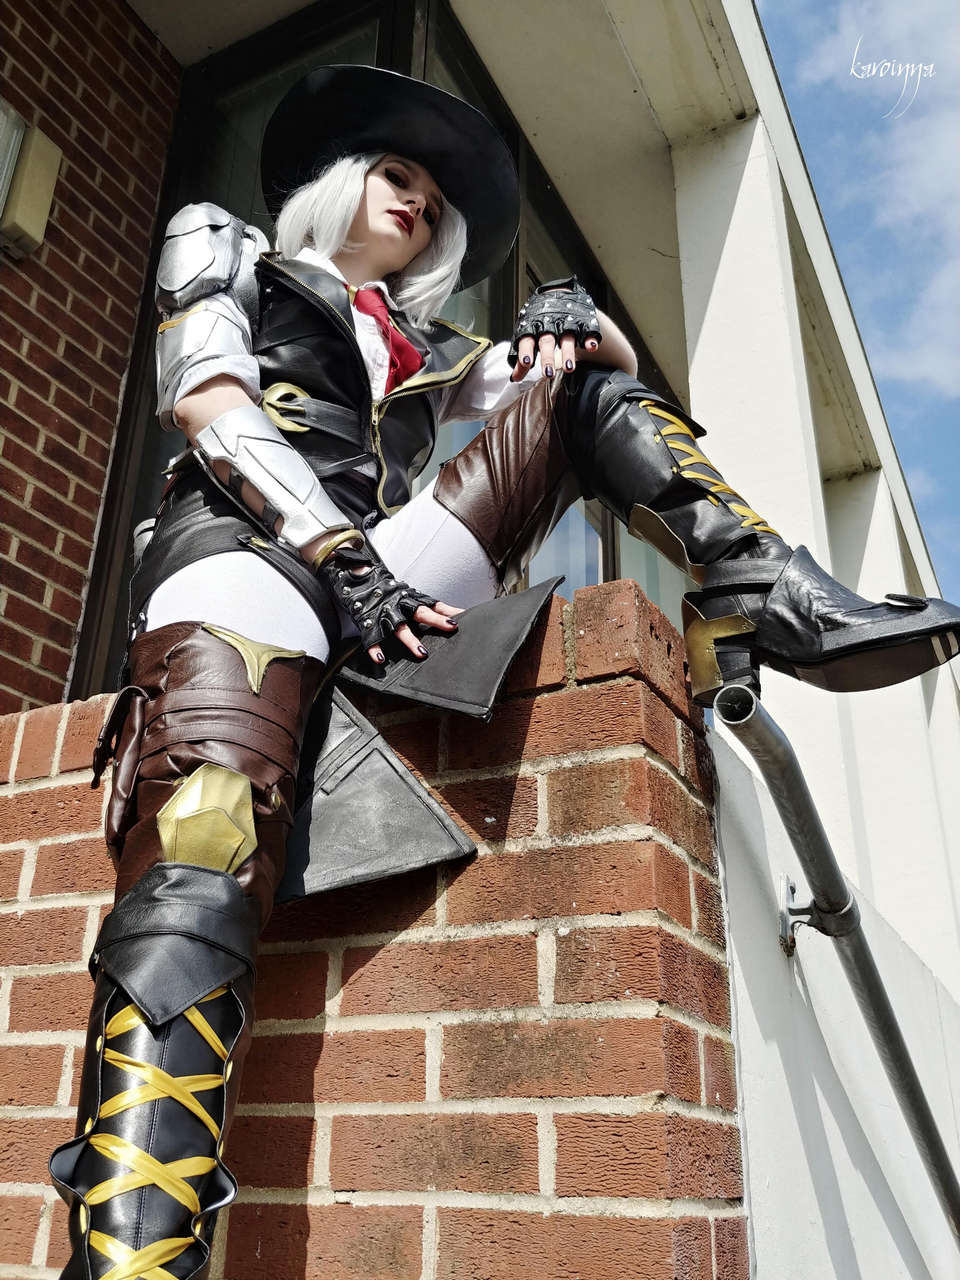 Self Made Ashe From Overwatch Cosplay By Karoinn